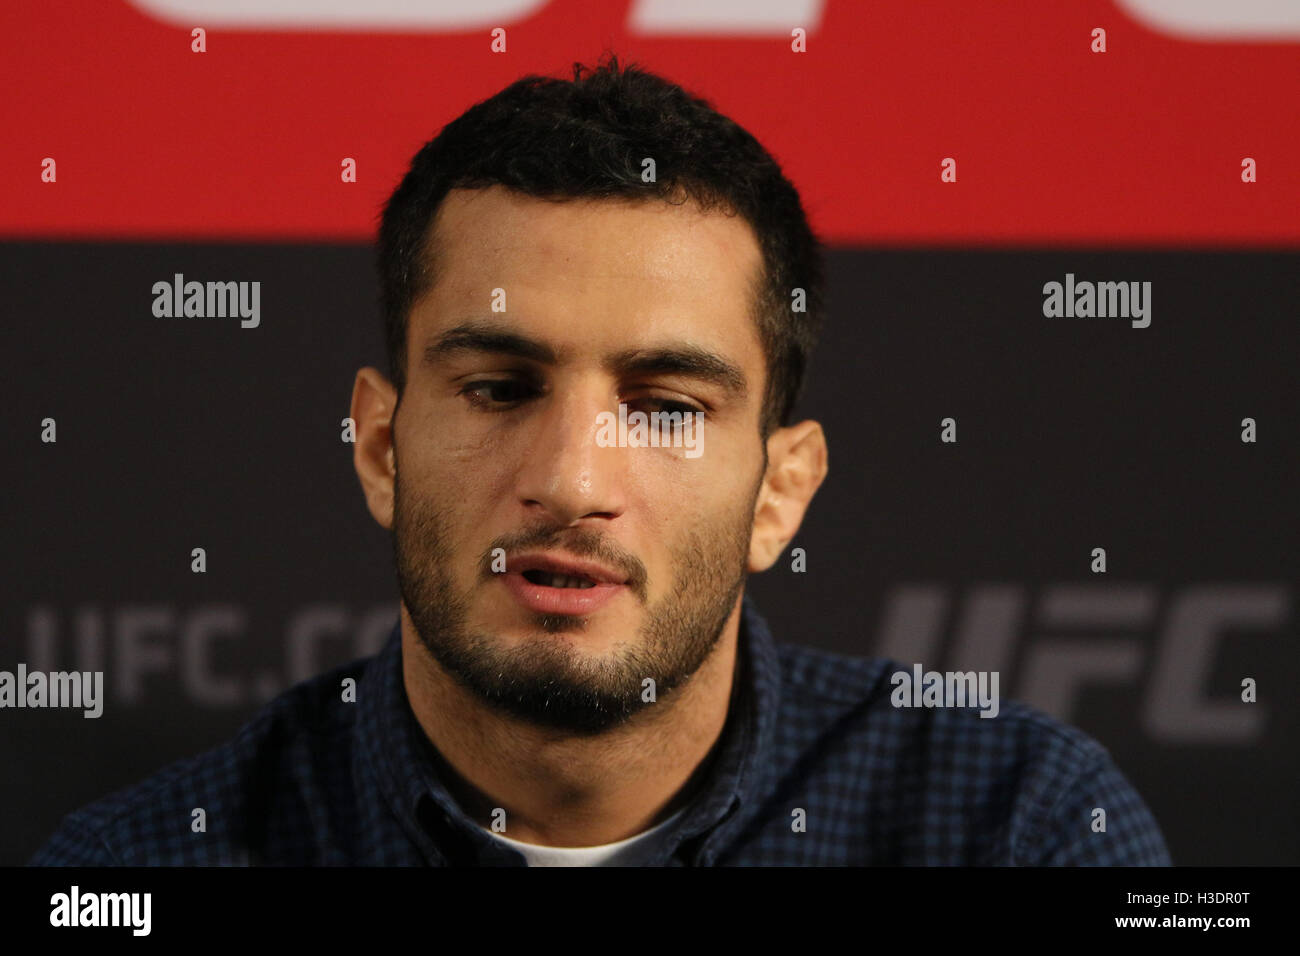 Manchester, UK. 6th October, 2016. UFC 204 - Media Day at Arena Manchester. Thursday the 6 of Oct. 2016. Gegard Mousasi answers media questions ahead of UFC 204.   Credit:  Dan Cooke/Alamy Live News Stock Photo